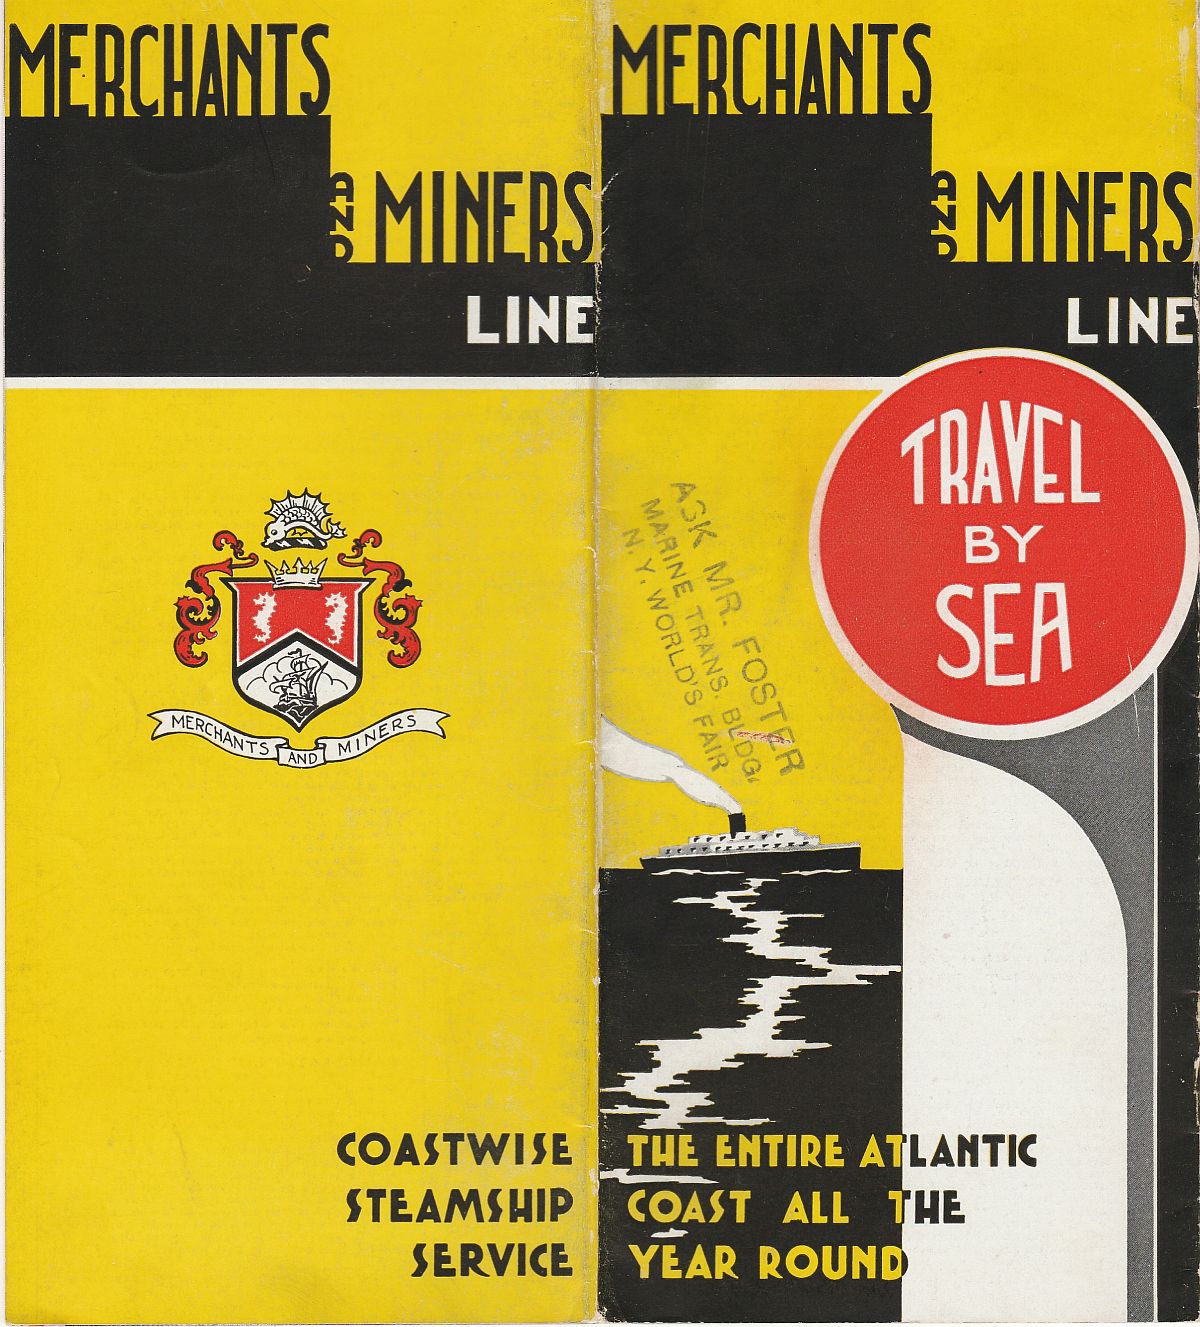 Merchants and Miners Line Brochure cover: Travel by sea: the entire Atlantic Coast all the year round